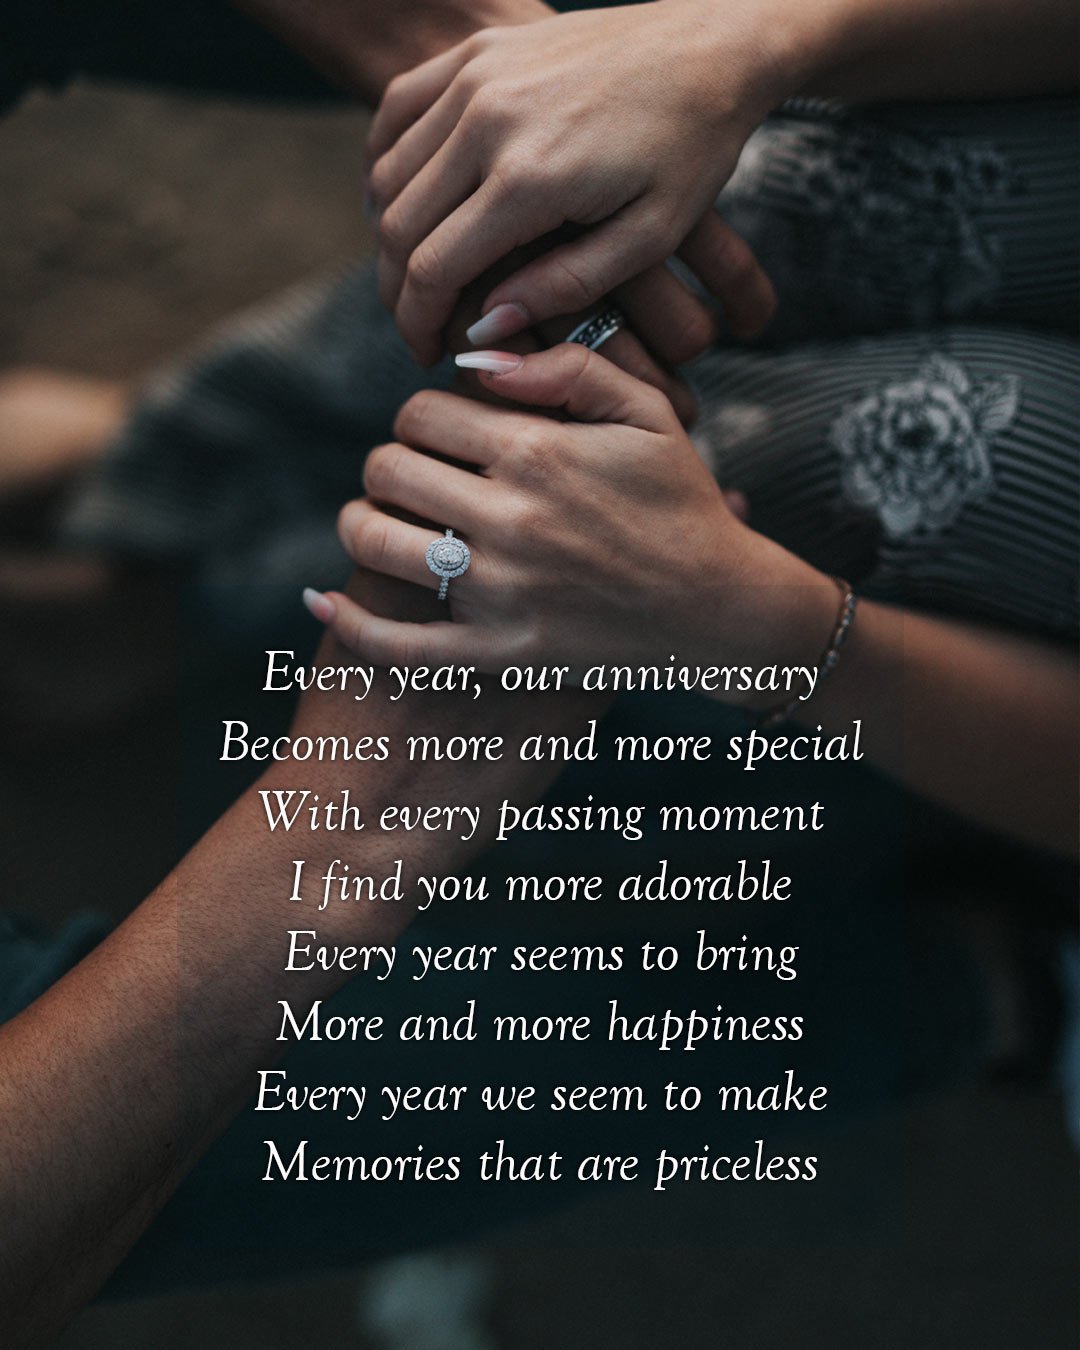 Poems for him on our anniversary